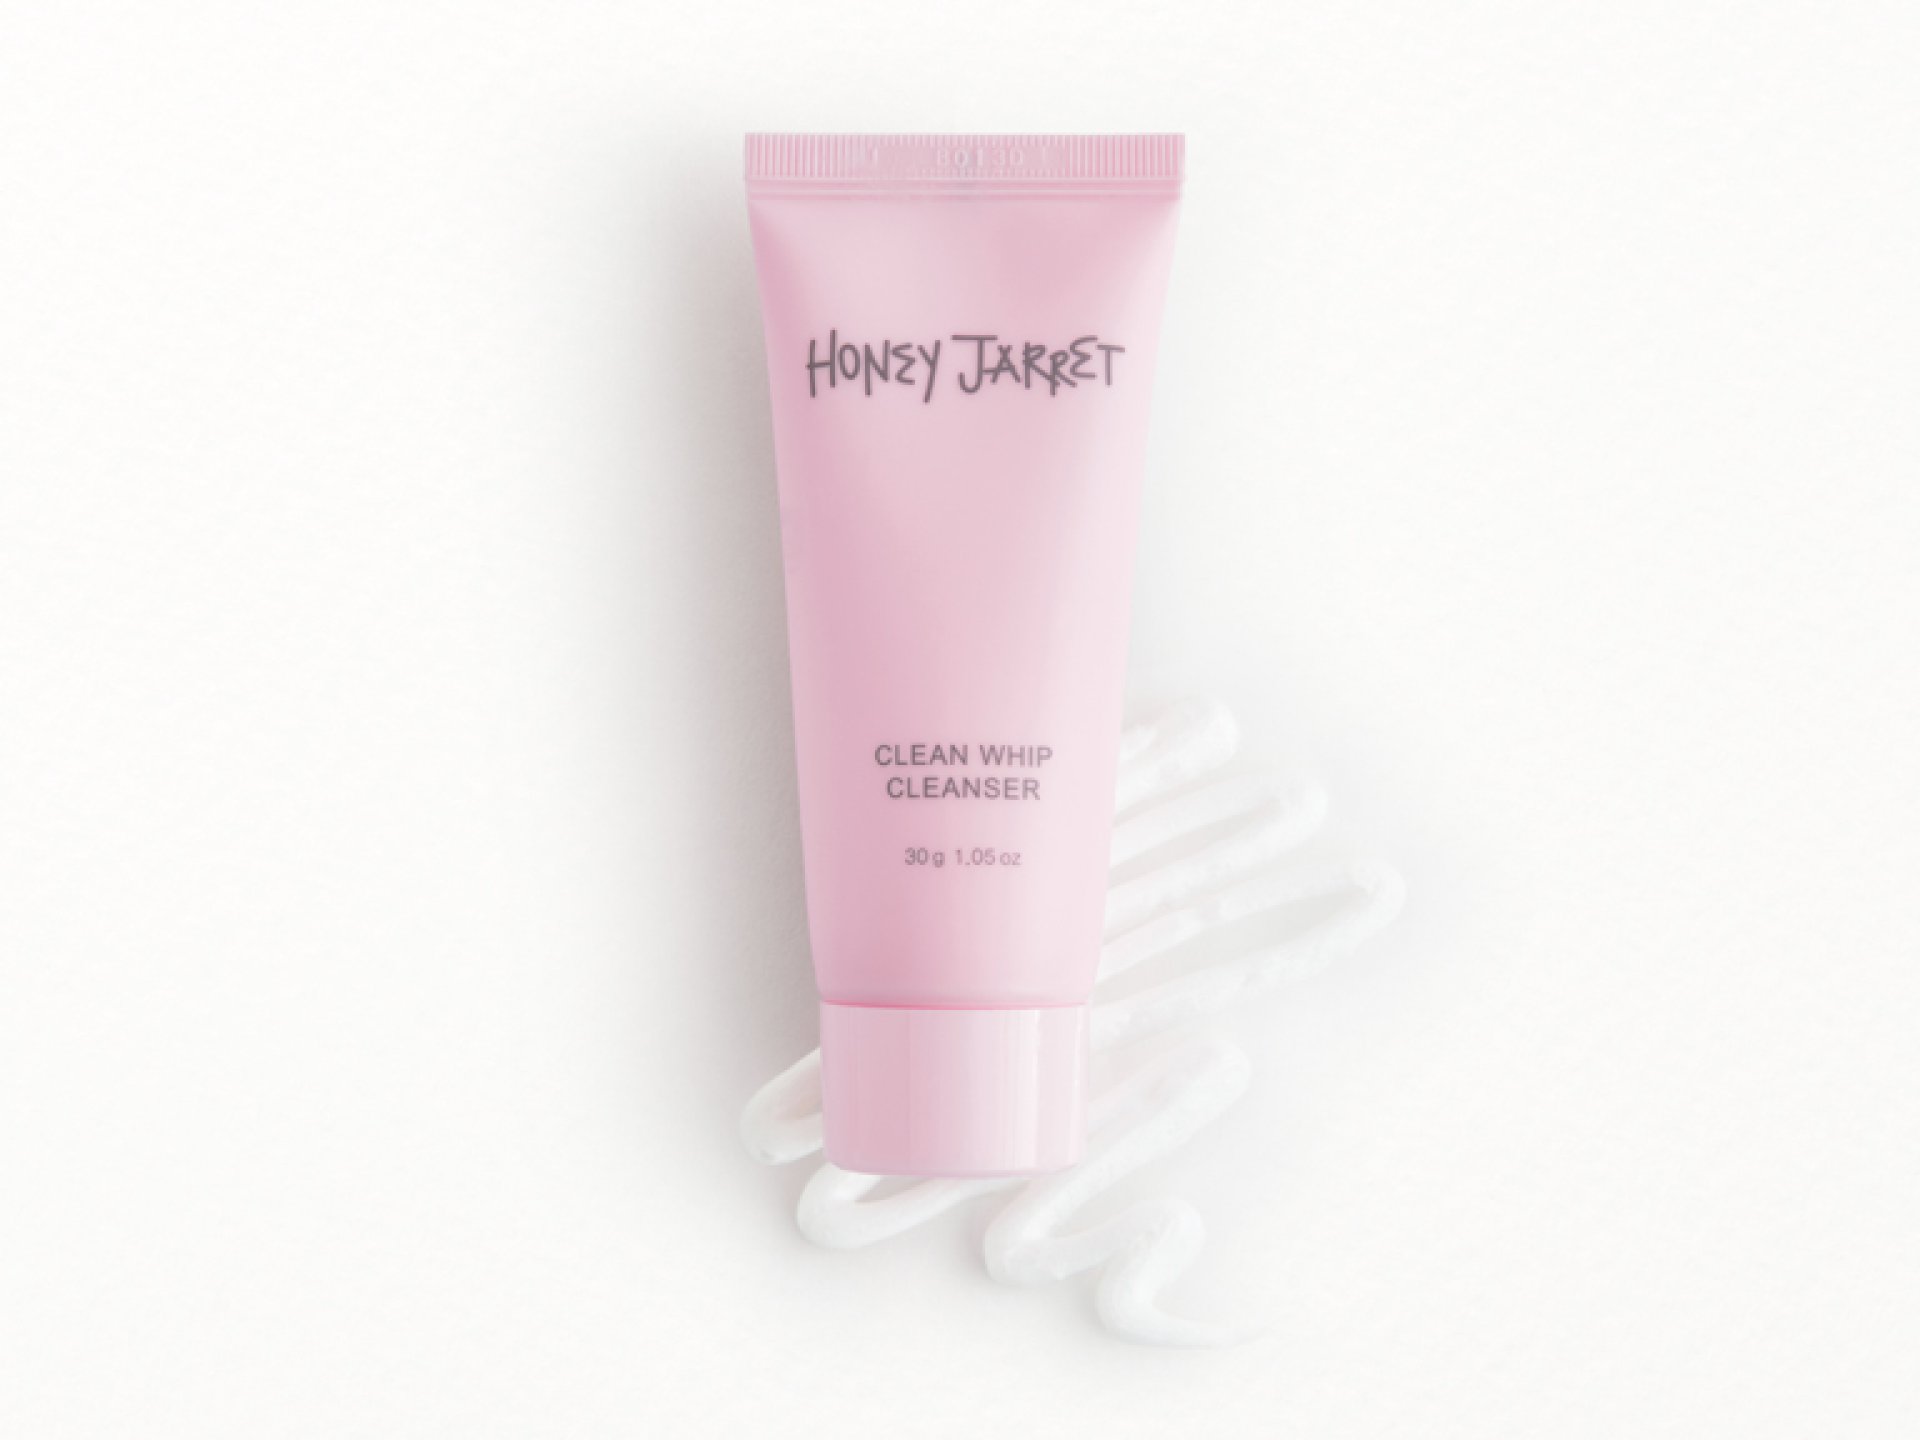 Honey Jarret Foaming Cleanser with swatch